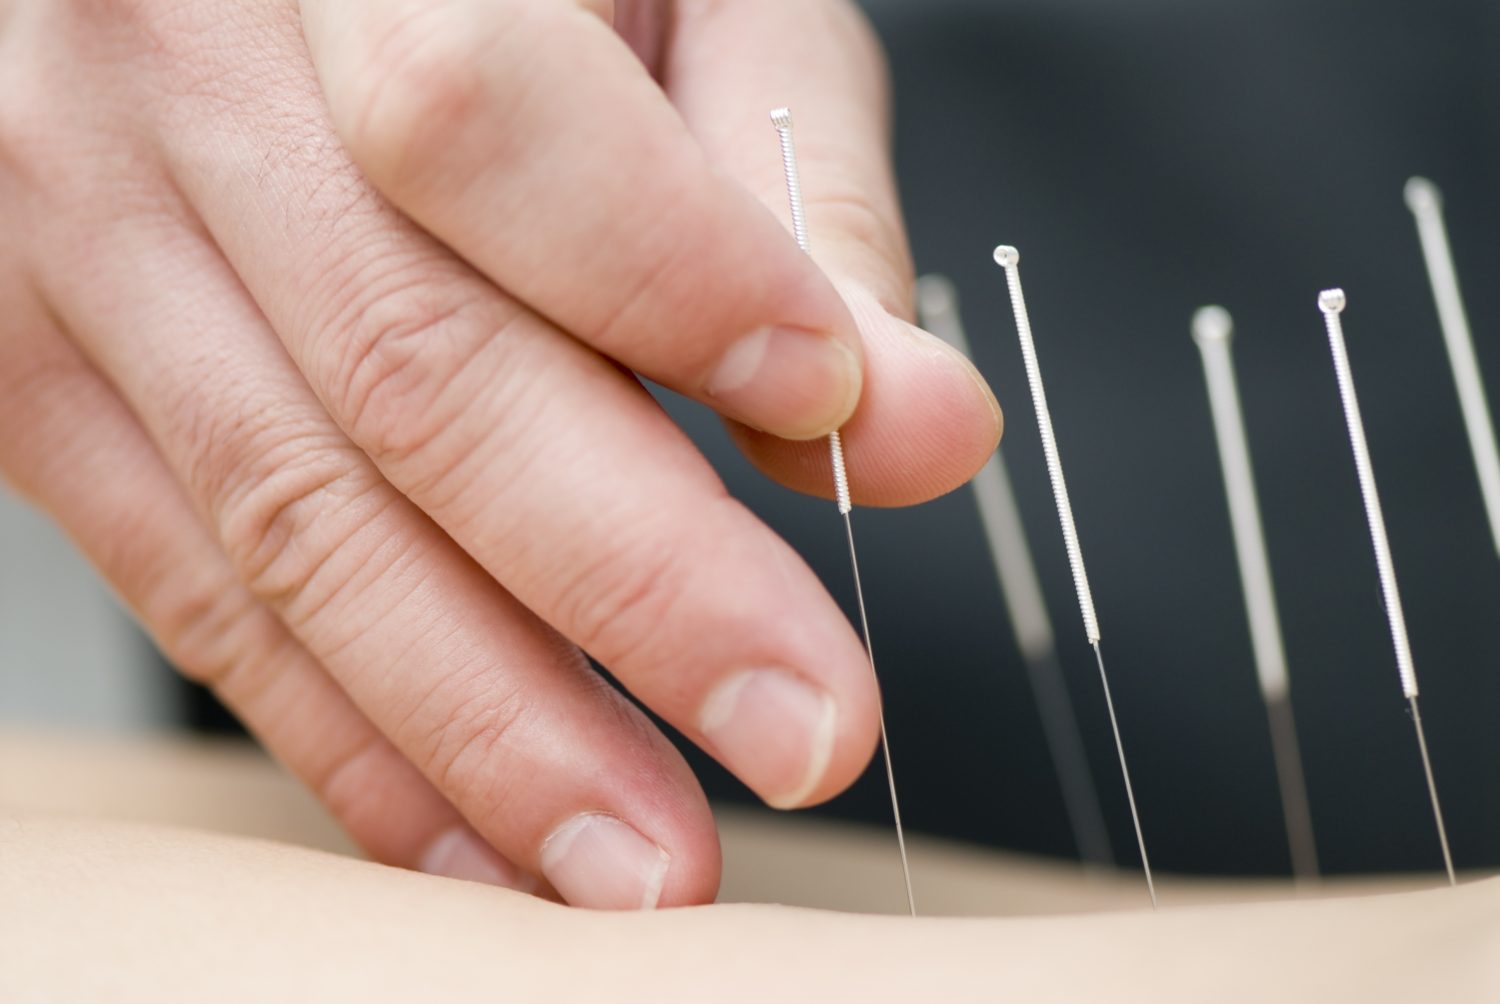 FDA proposes that doctors learn about acupuncture for pain management